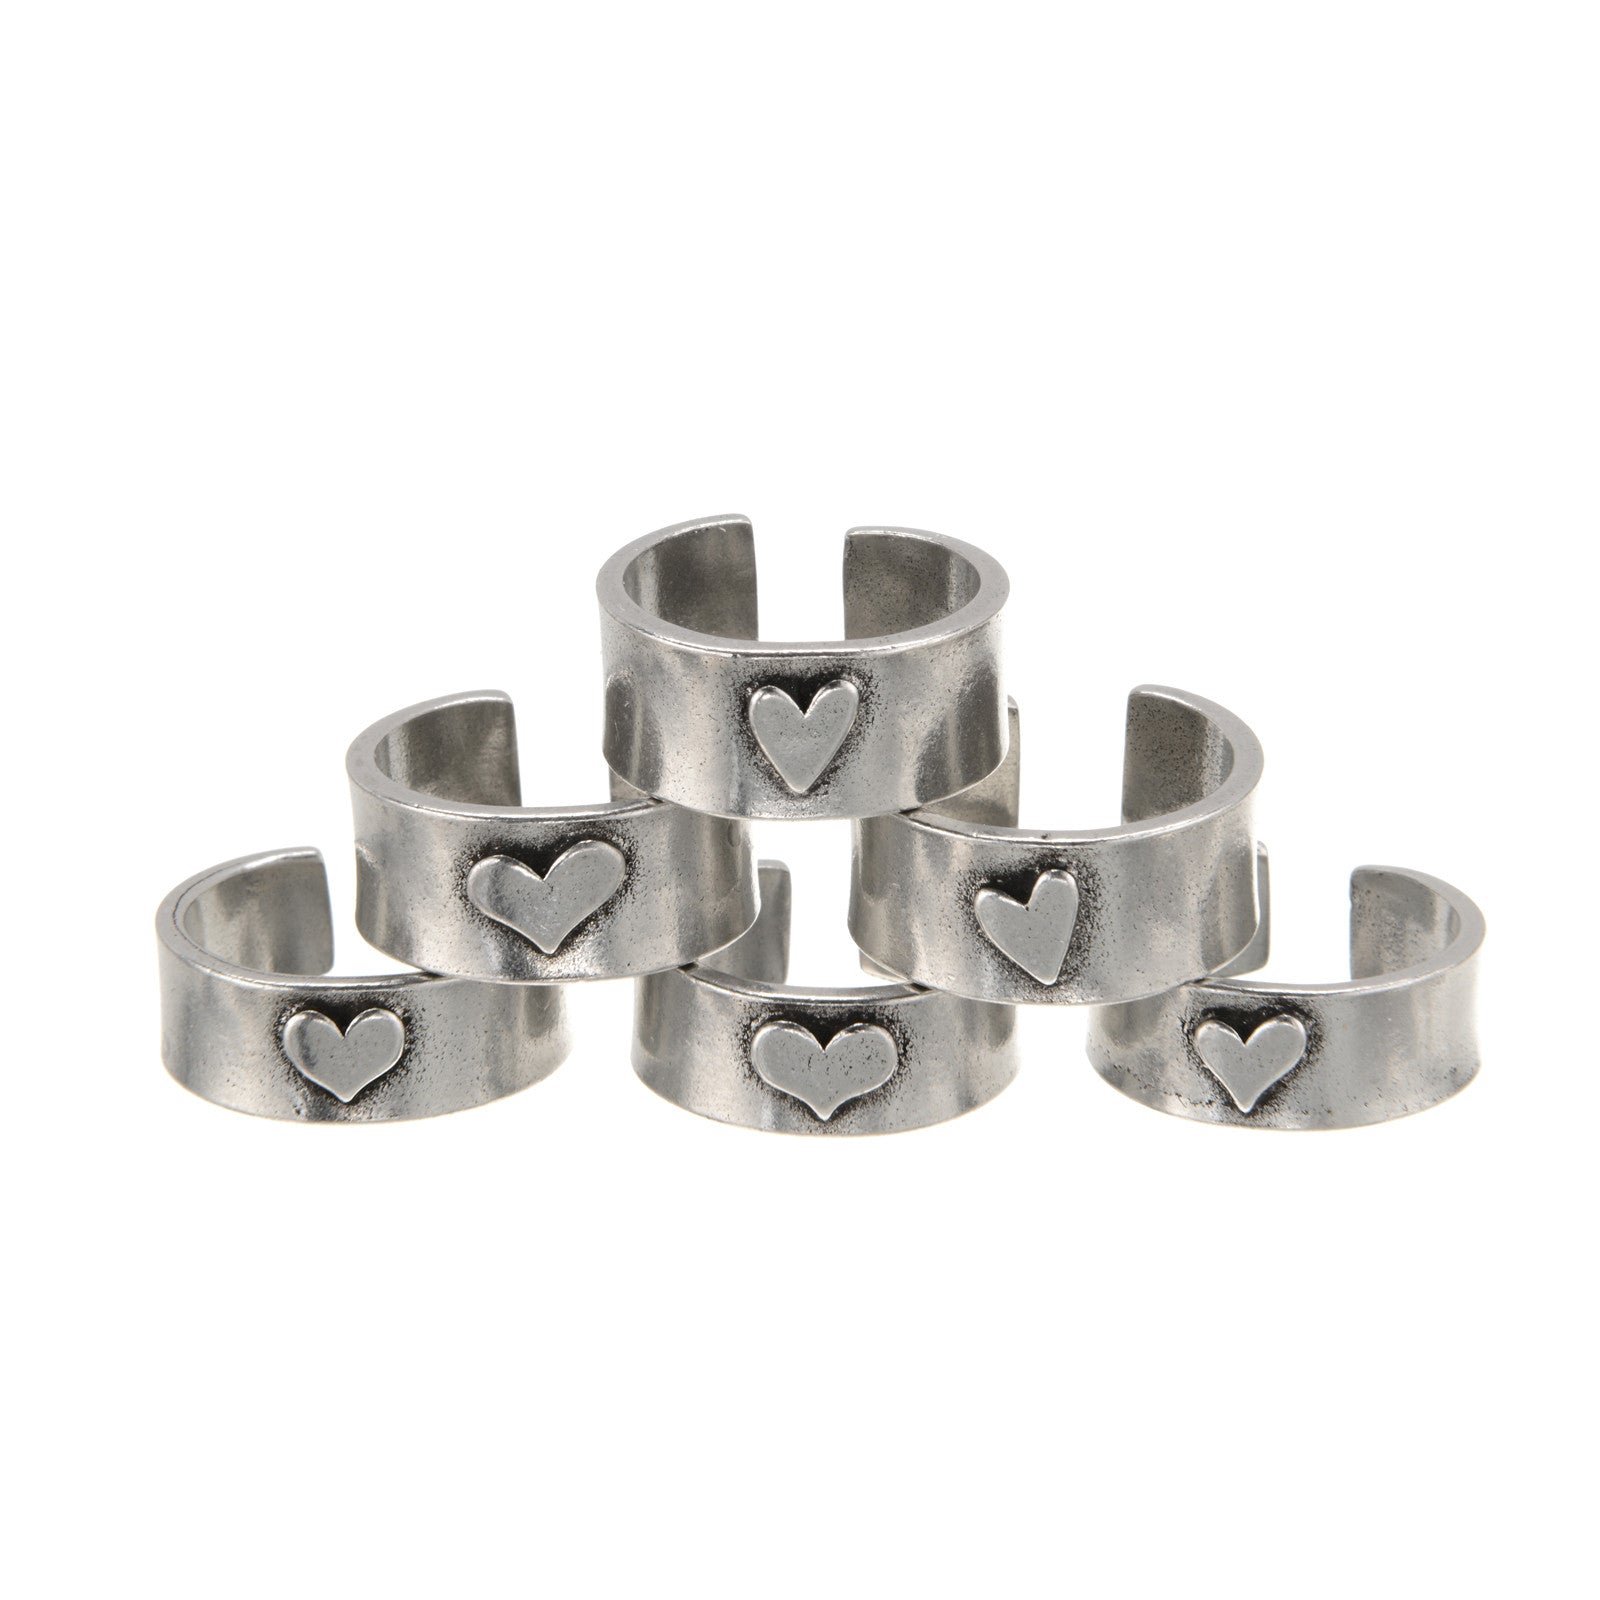 Stacked "Hearts of Gold" BIG HEART Rings